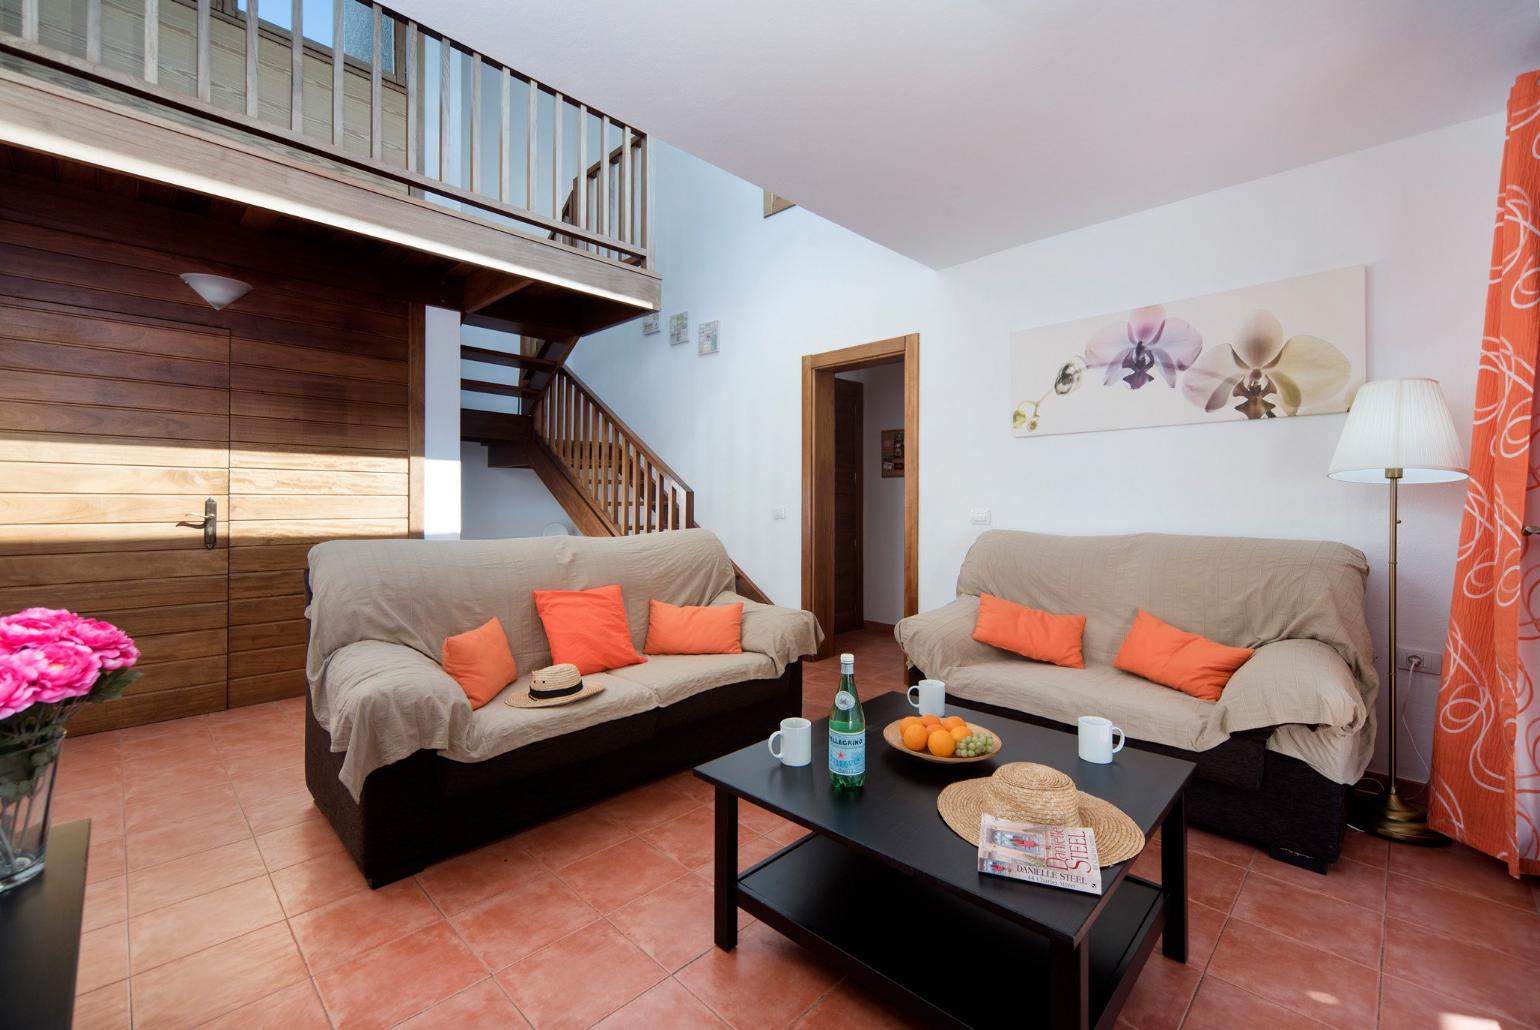 Living room with sofas, WiFi internet, satellite TV, DVD player and terrace access